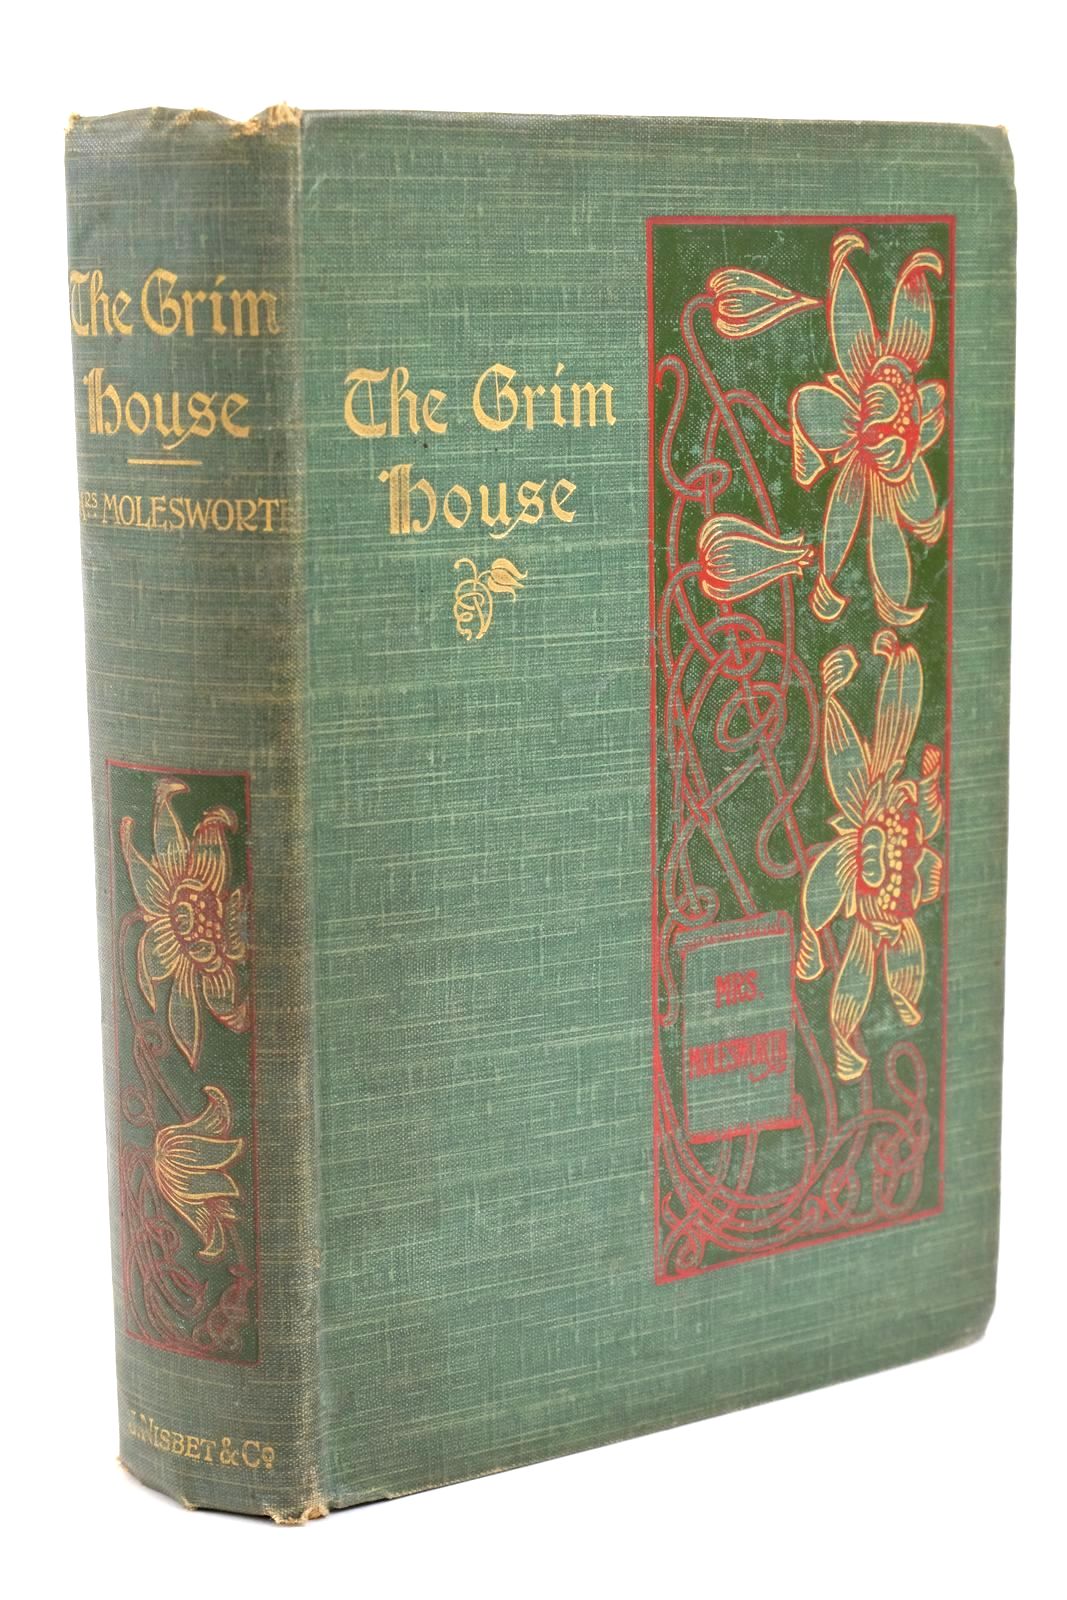 Photo of THE GRIM HOUSE written by Molesworth, Mrs. illustrated by Goble, Warwick published by James Nisbet (STOCK CODE: 1322901)  for sale by Stella & Rose's Books